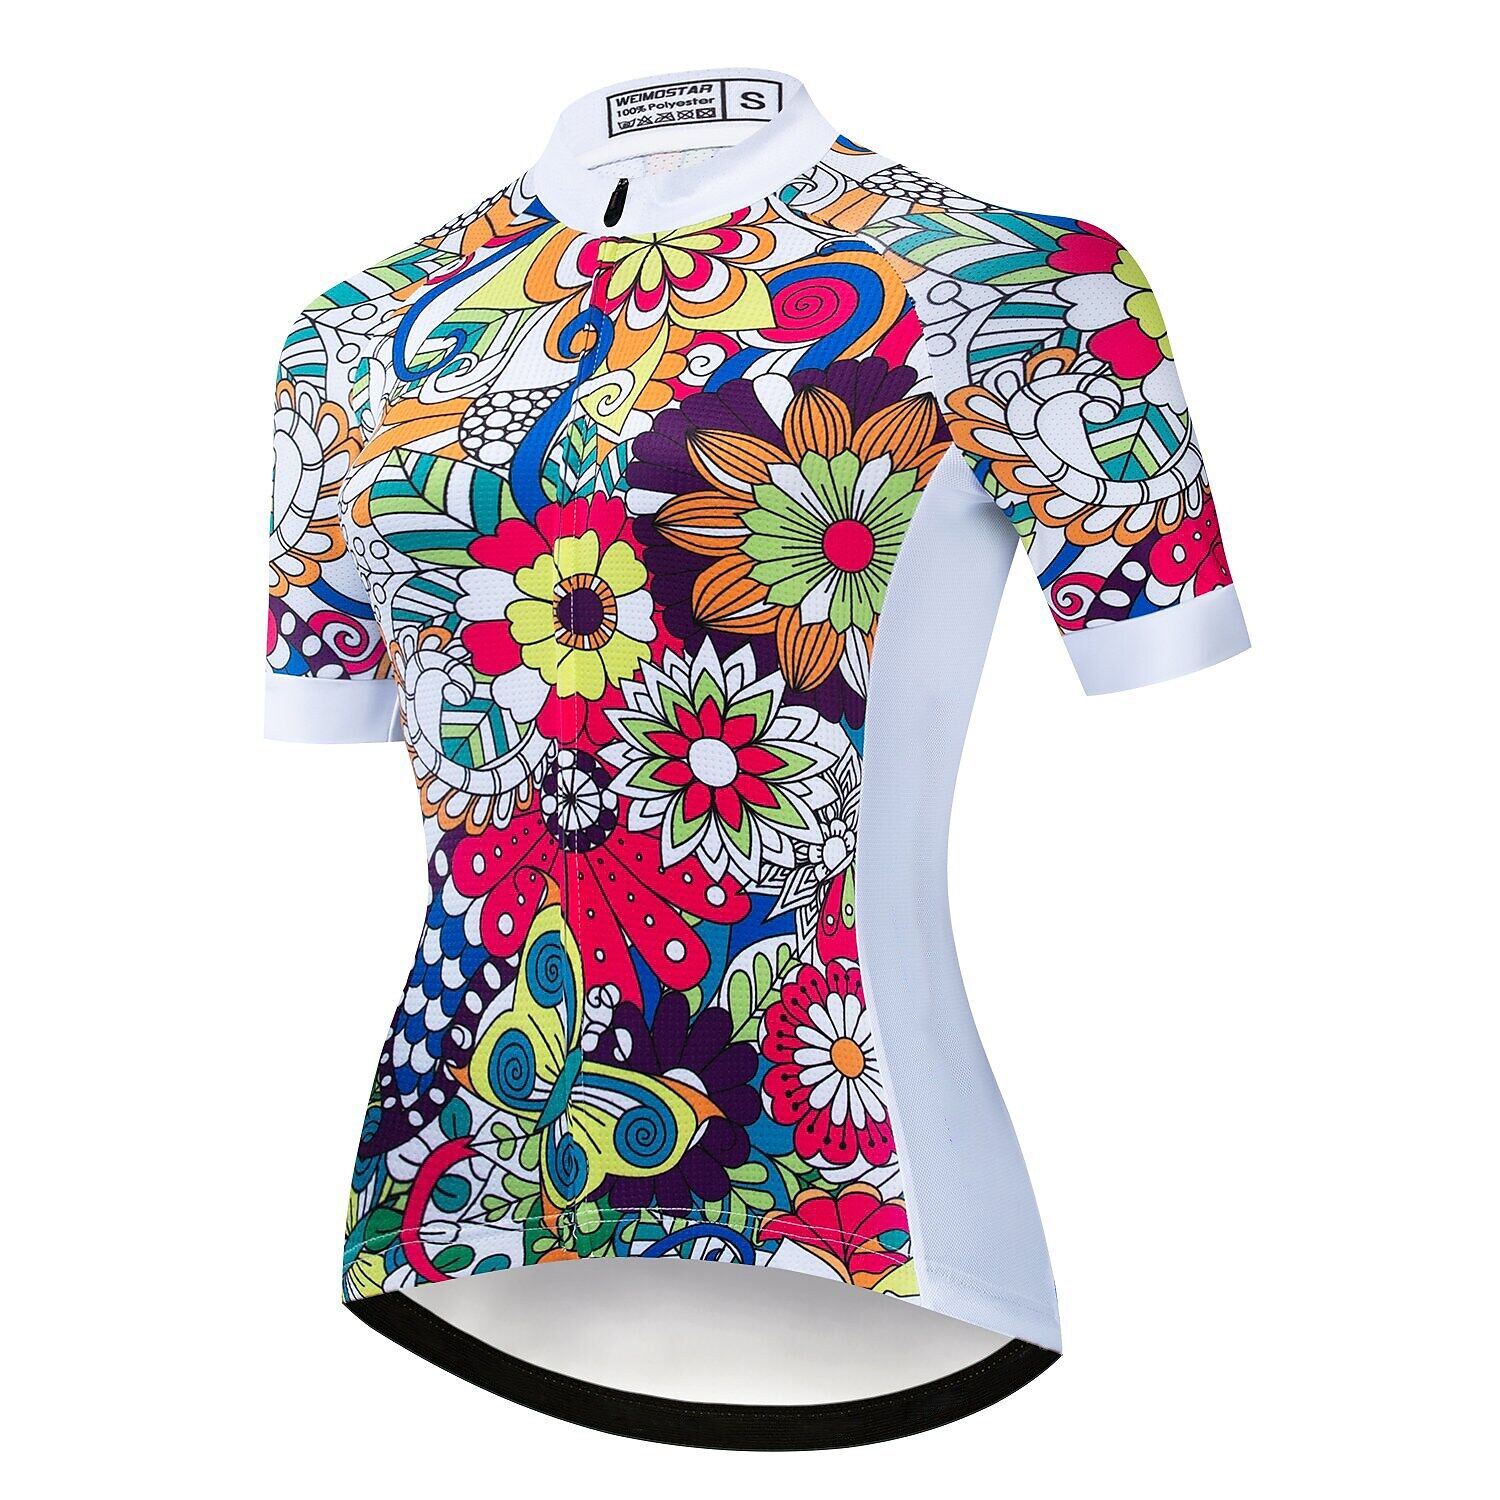 Weimostar 2021 Women's Cycling Bike Jersey Short Sleeve Breathable Bicycle Shirt 3 Rear Pockets Yellow Colorful Butterfly 